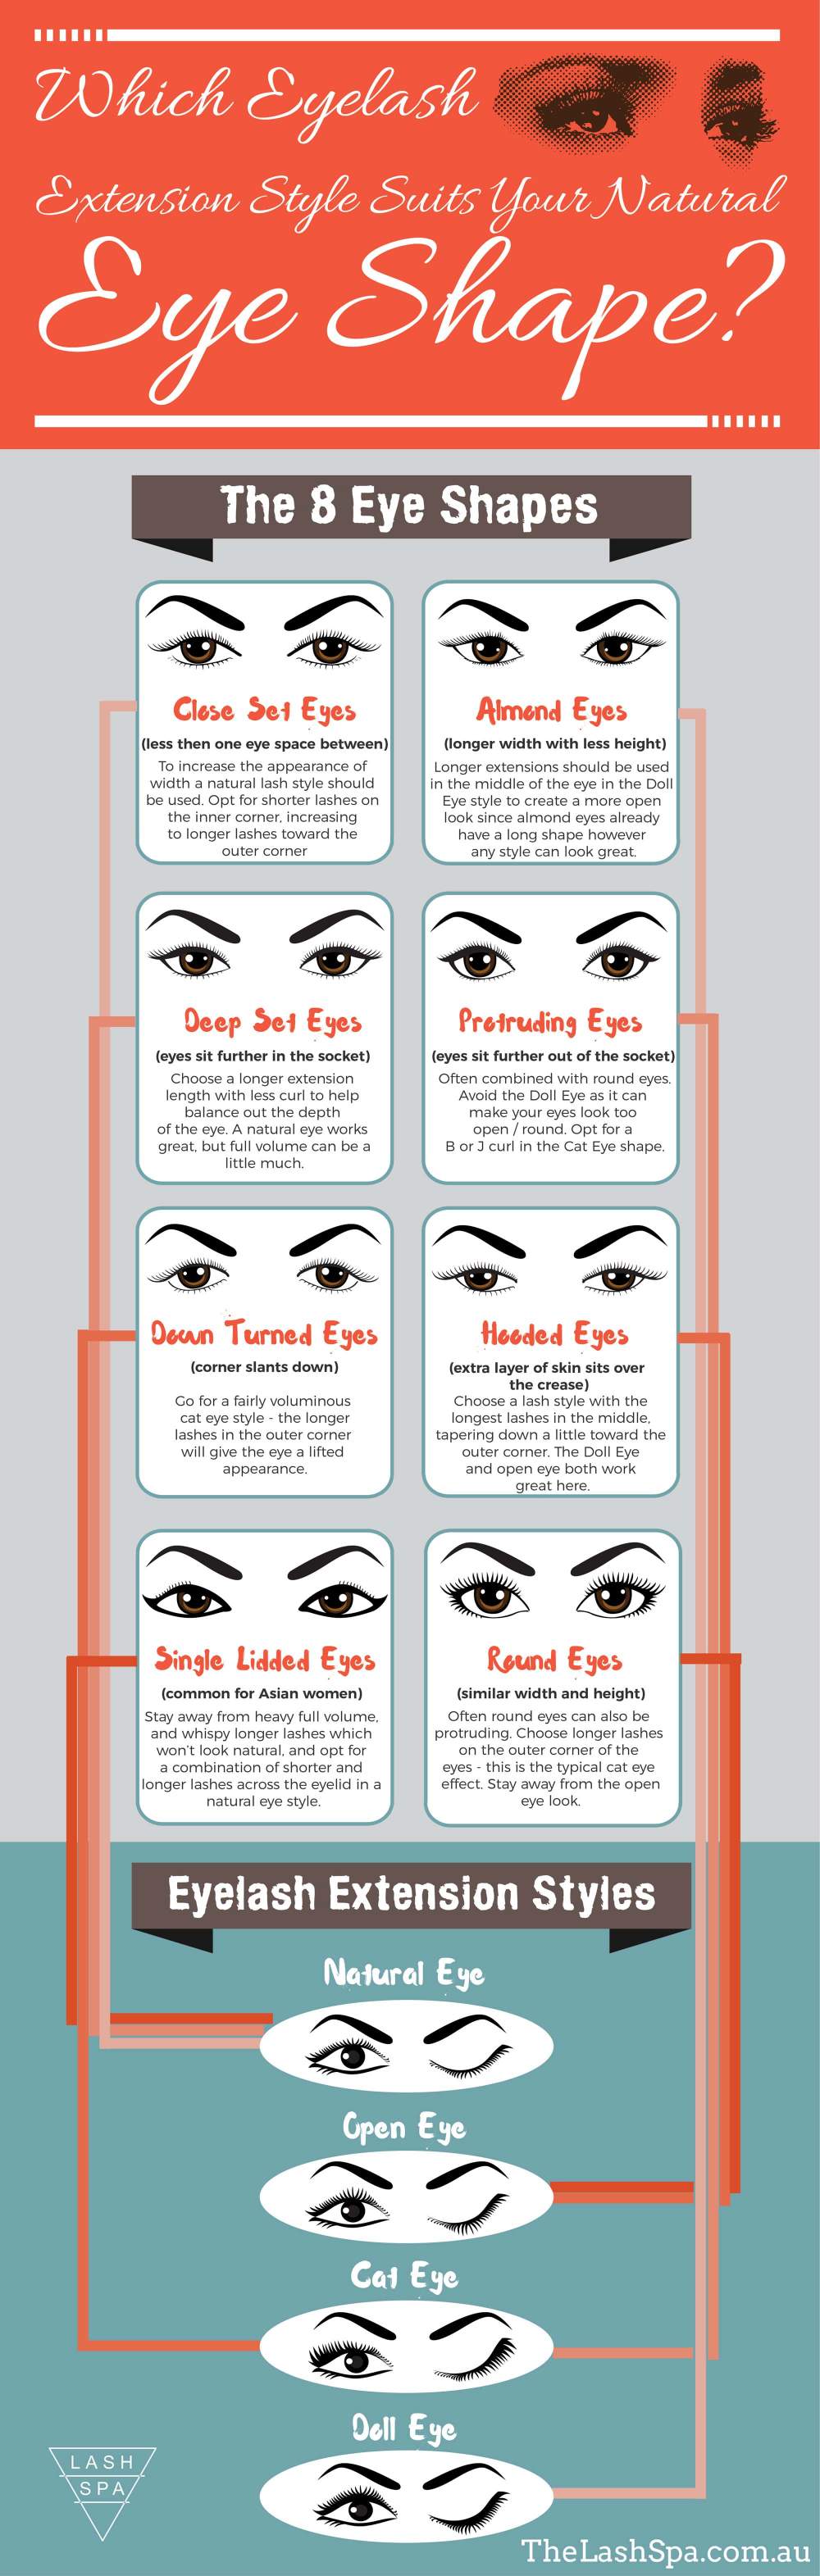 Which Eyelash Extension Style Suits Your Natural Eye Shape